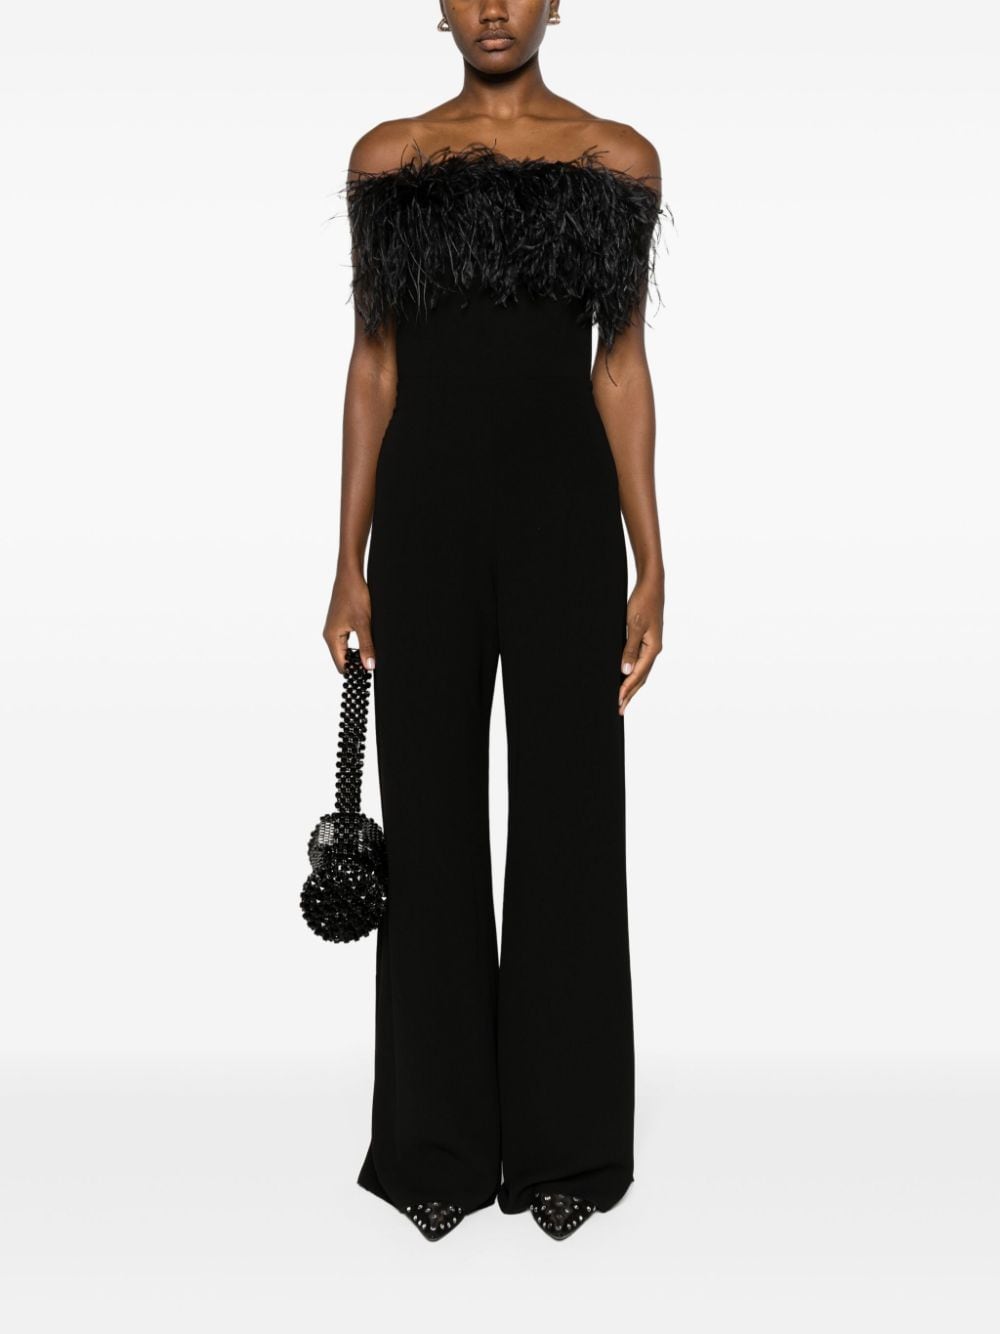 Image 2 of 16Arlington Taree feather-trimmed strapless jumpsuit